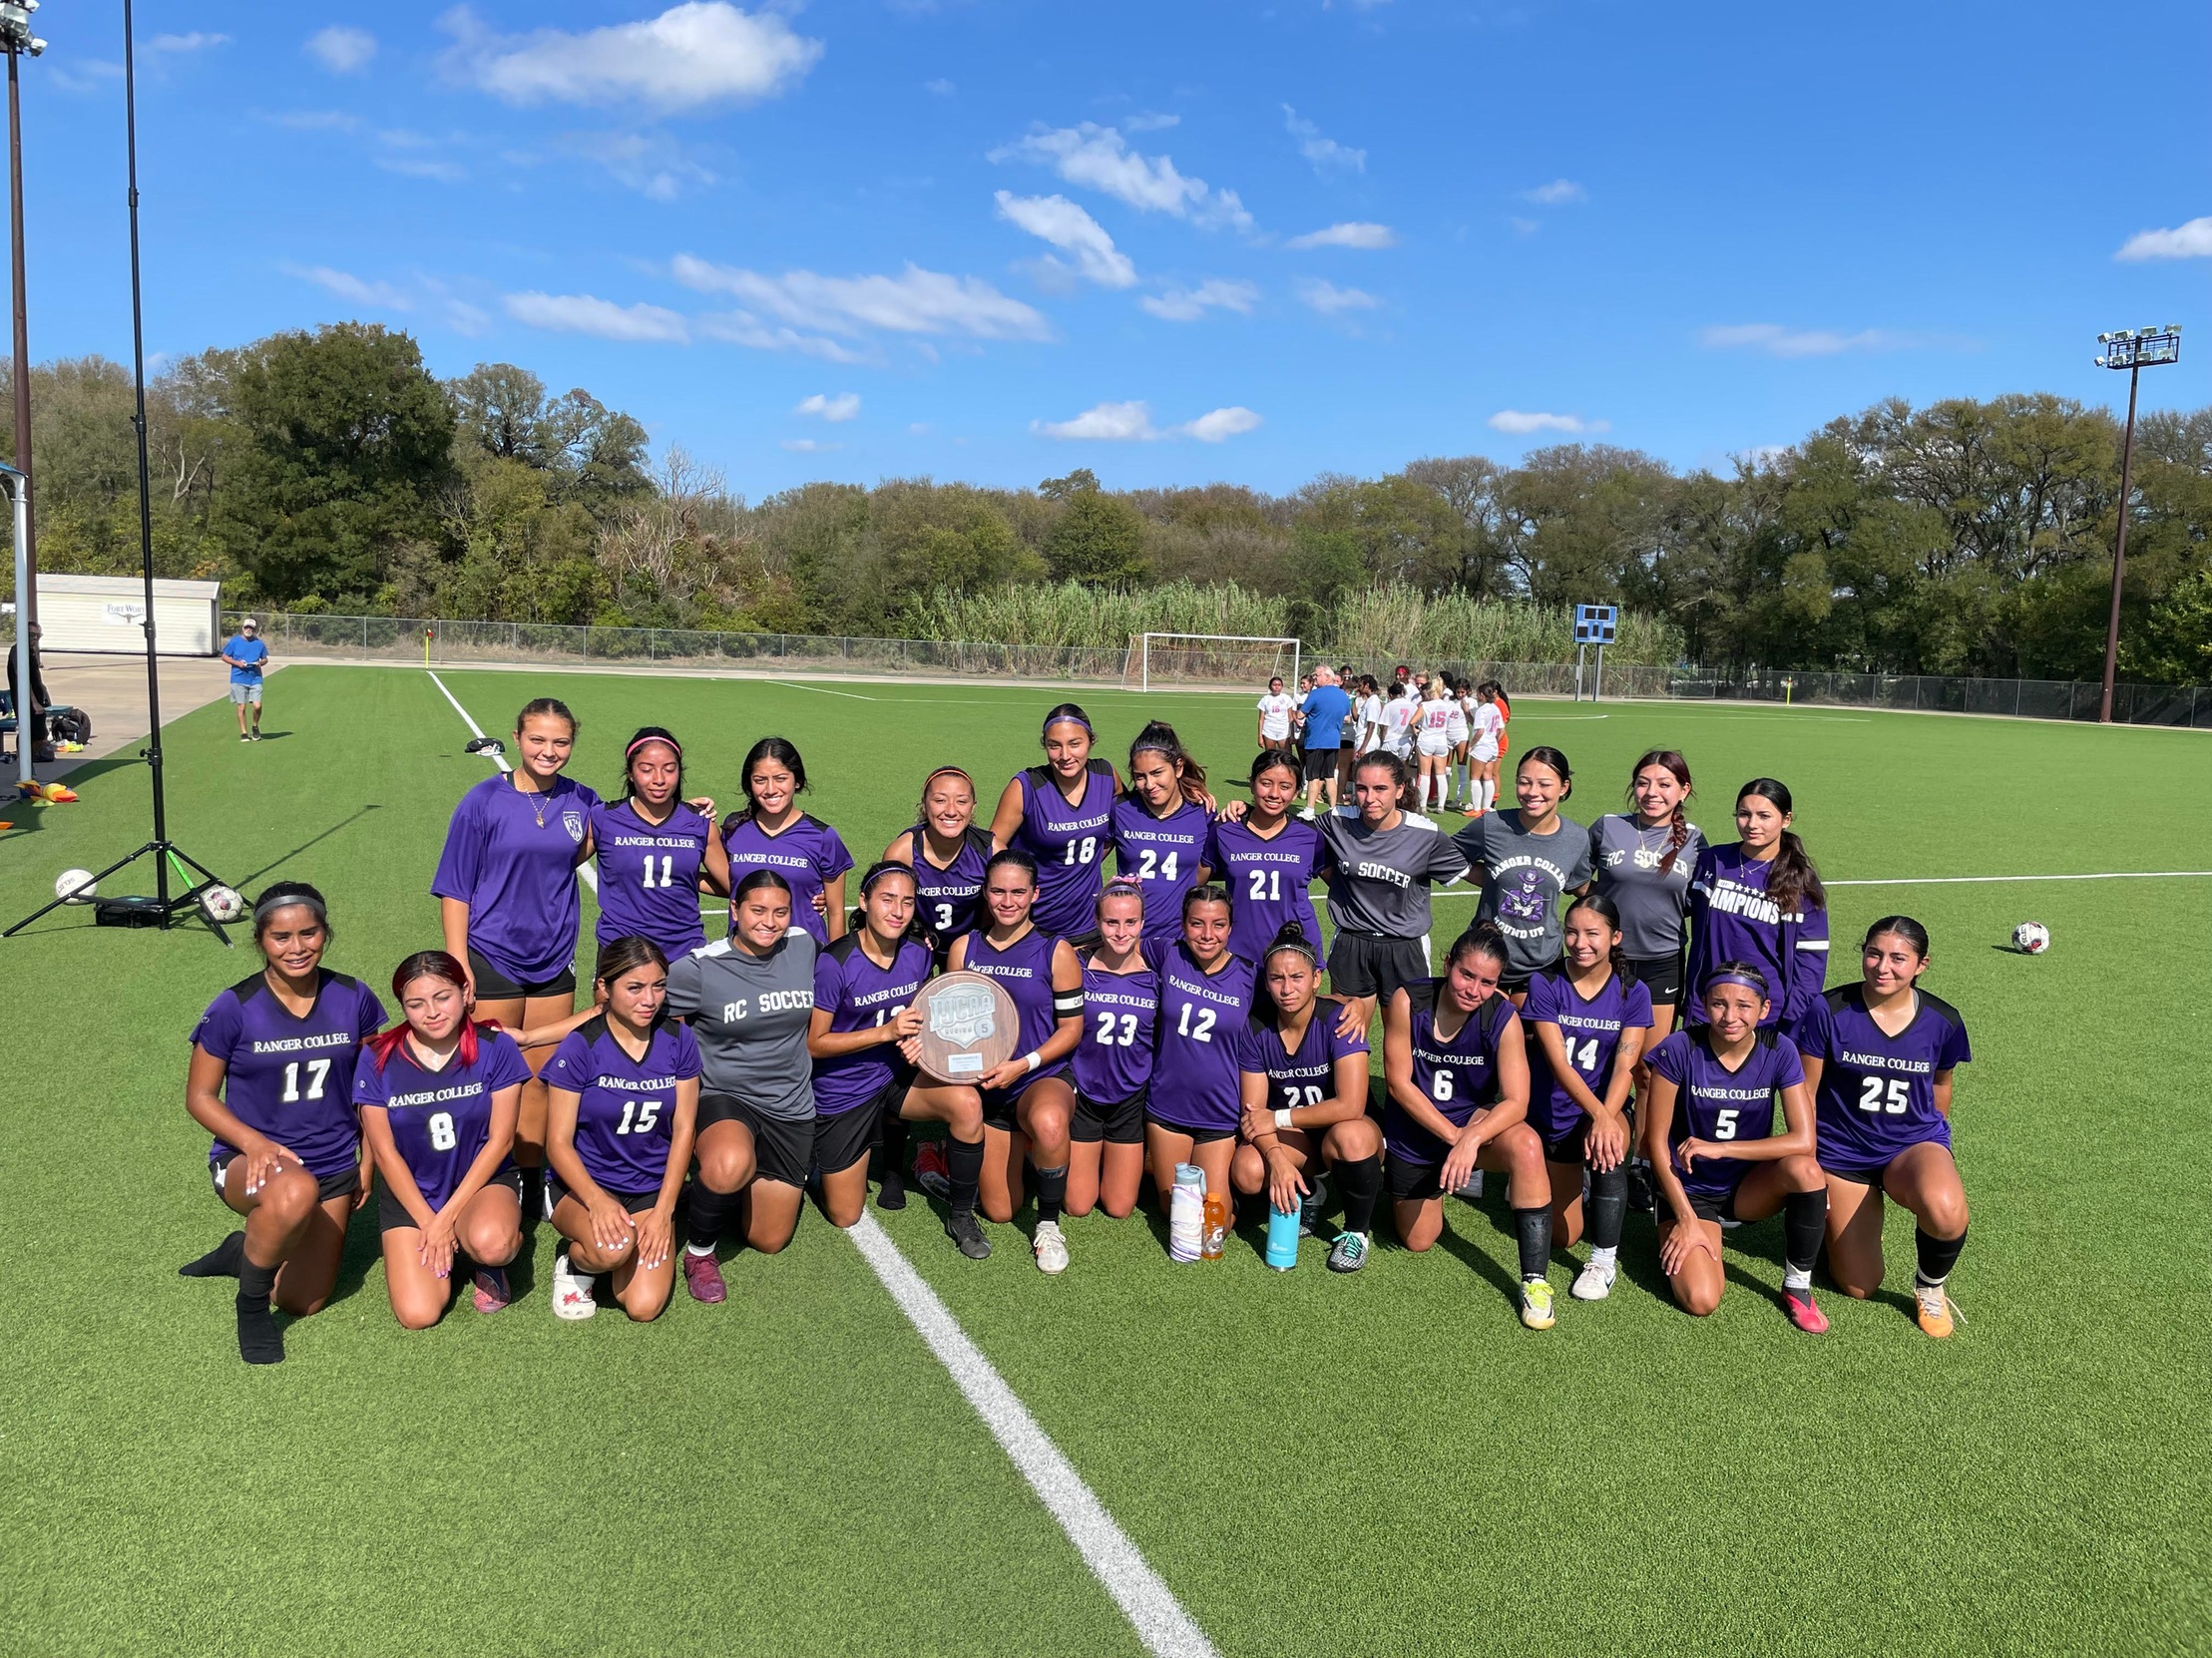 Ranger College Women's Soccer has a great season and finishes in second place